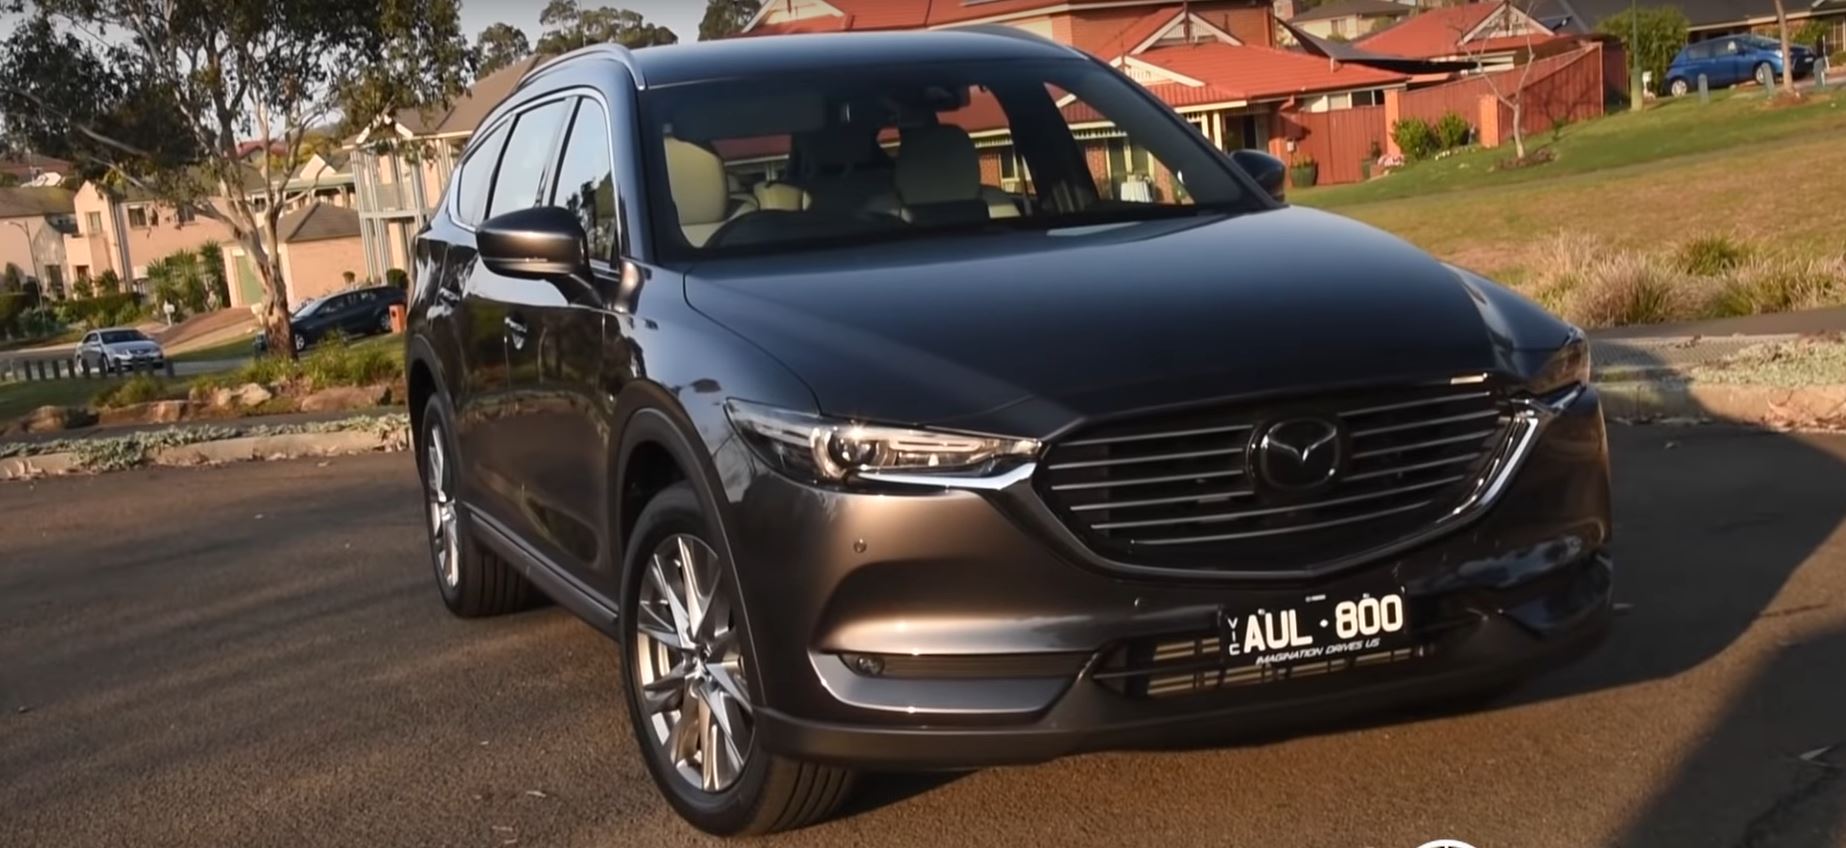 Mazda CX-8 Exclusive AWD: Full Review and Test Drive 